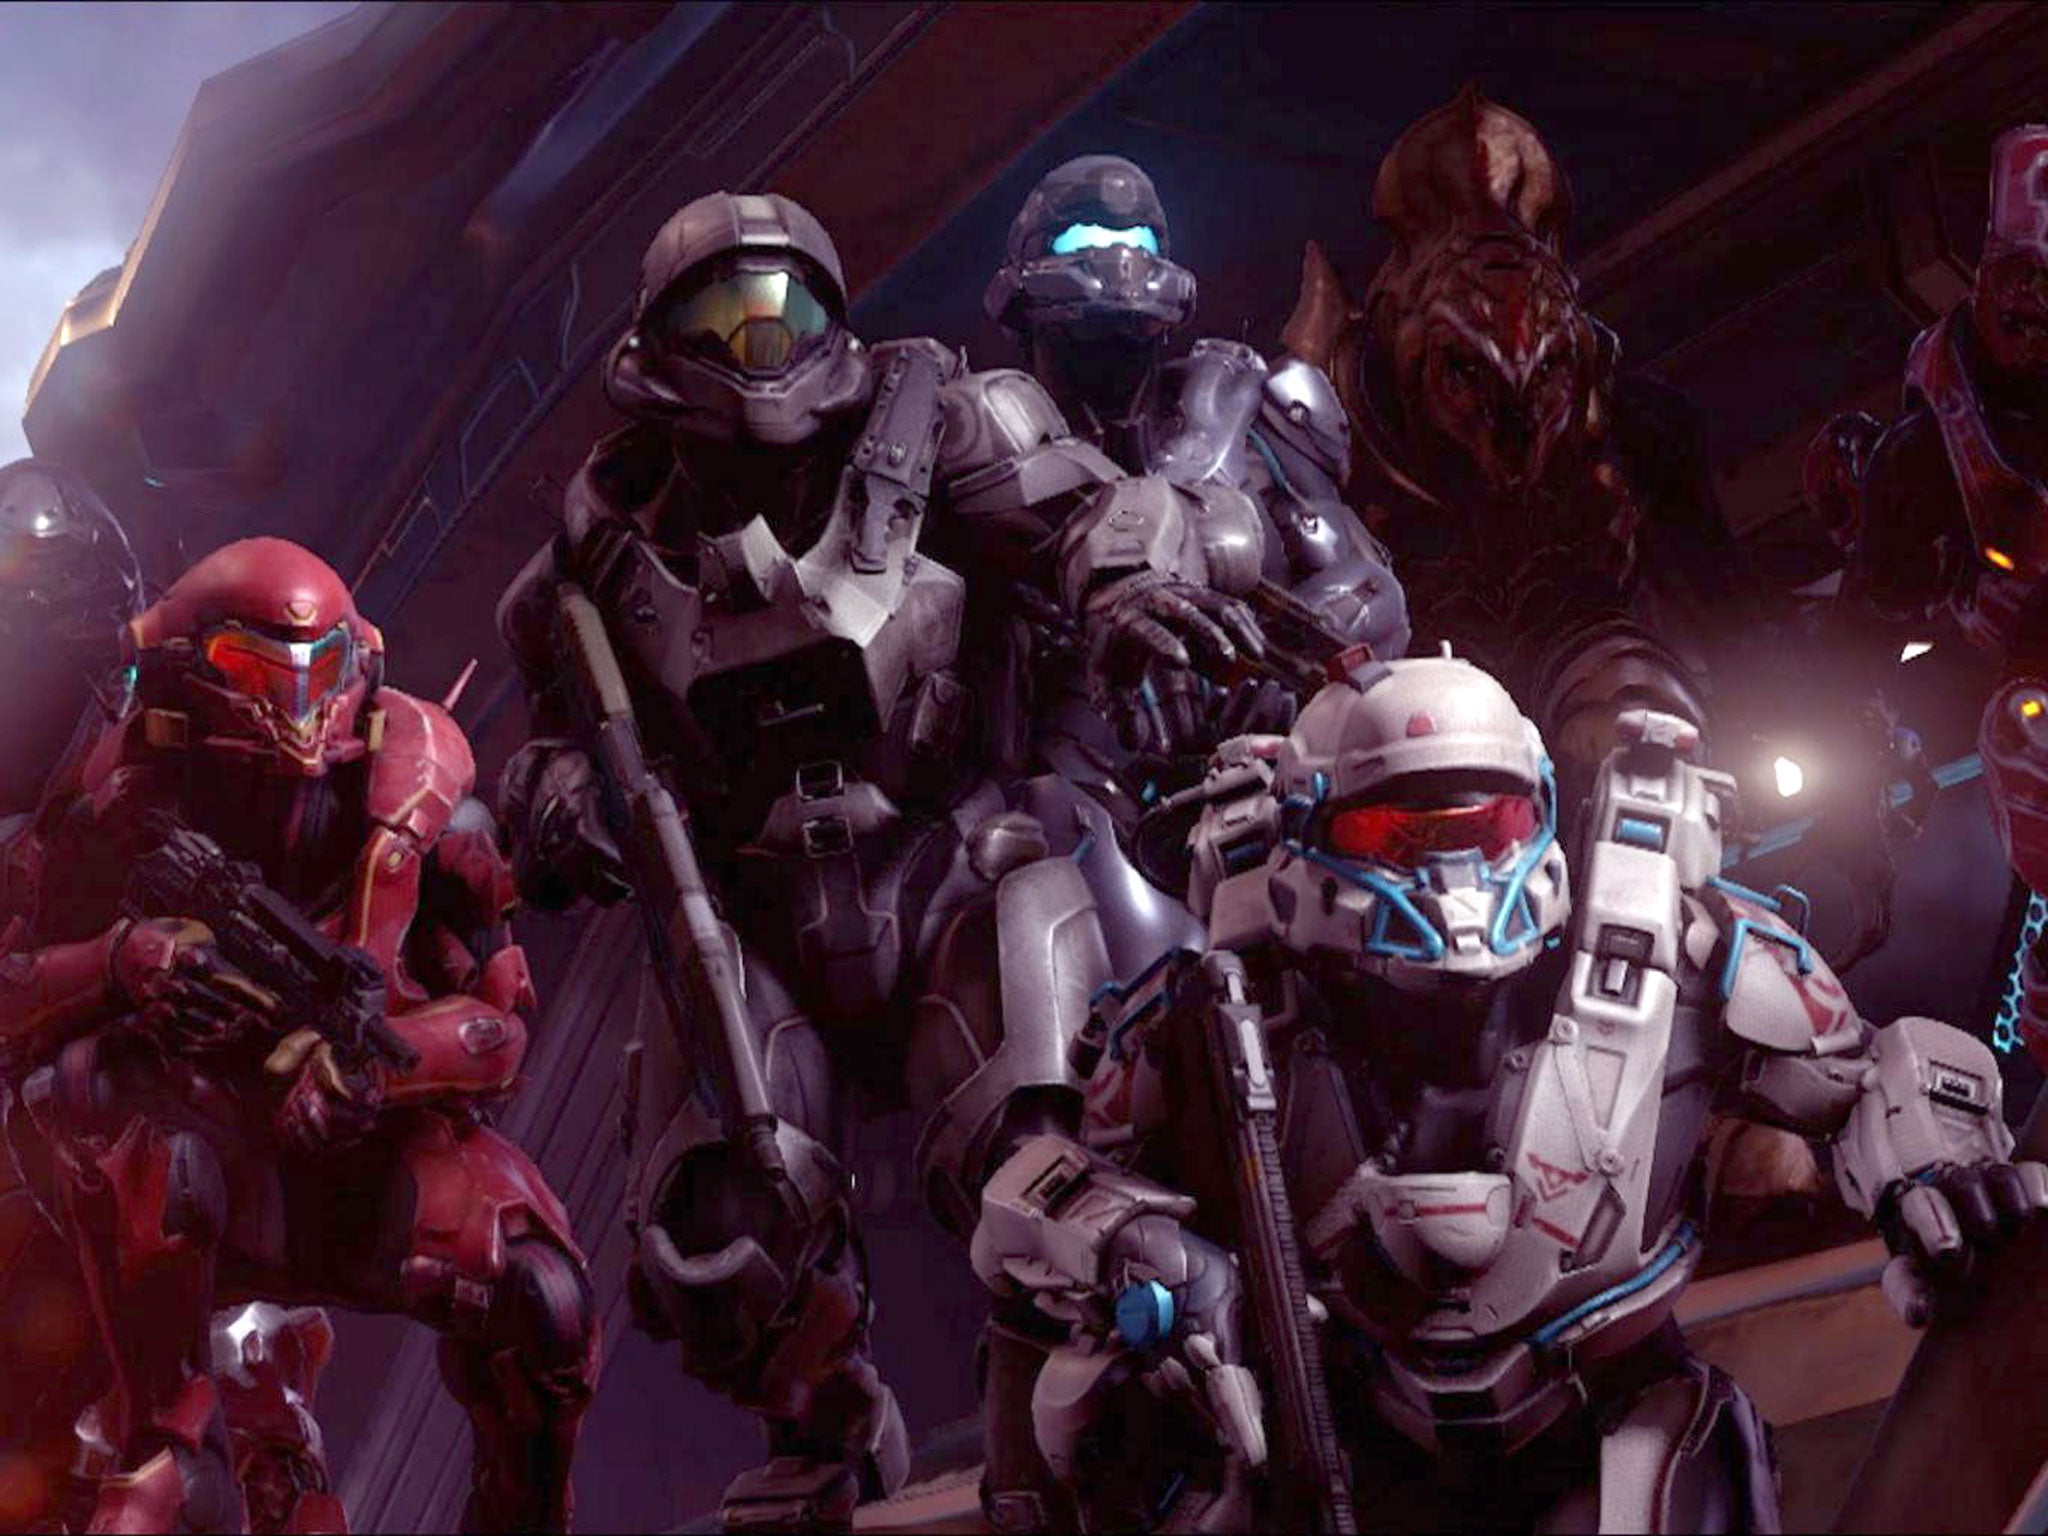 Halo 5 marks a worthy first step for the series as it enters the Xbox One era